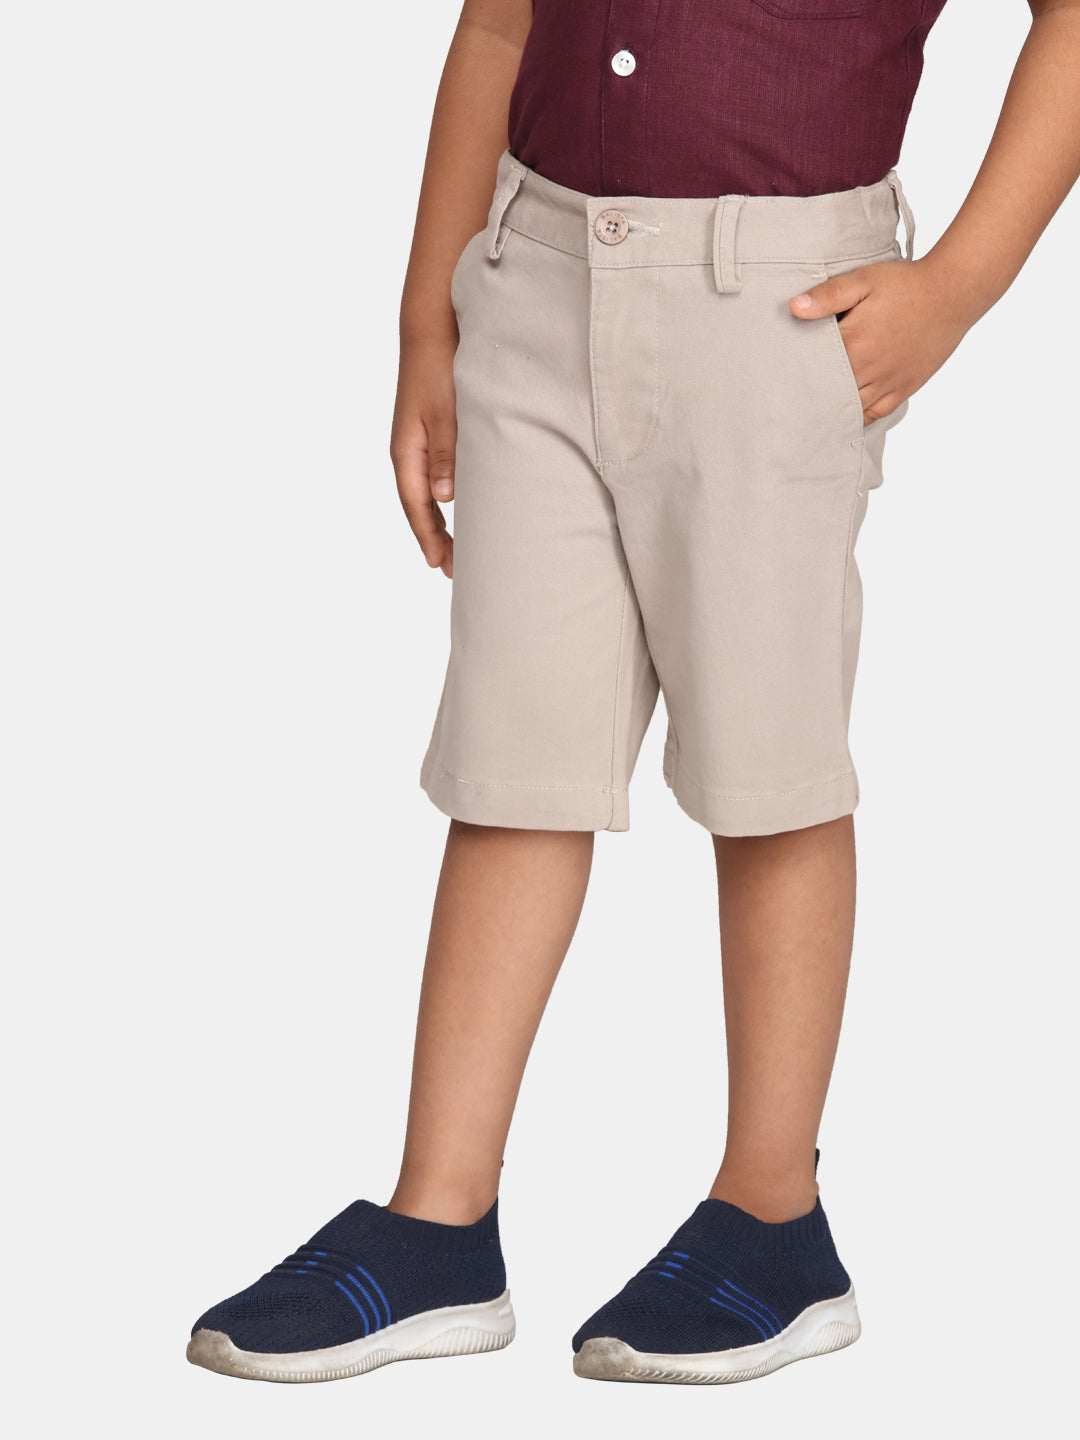 Boys Beige Colour Casual Chino Shorts